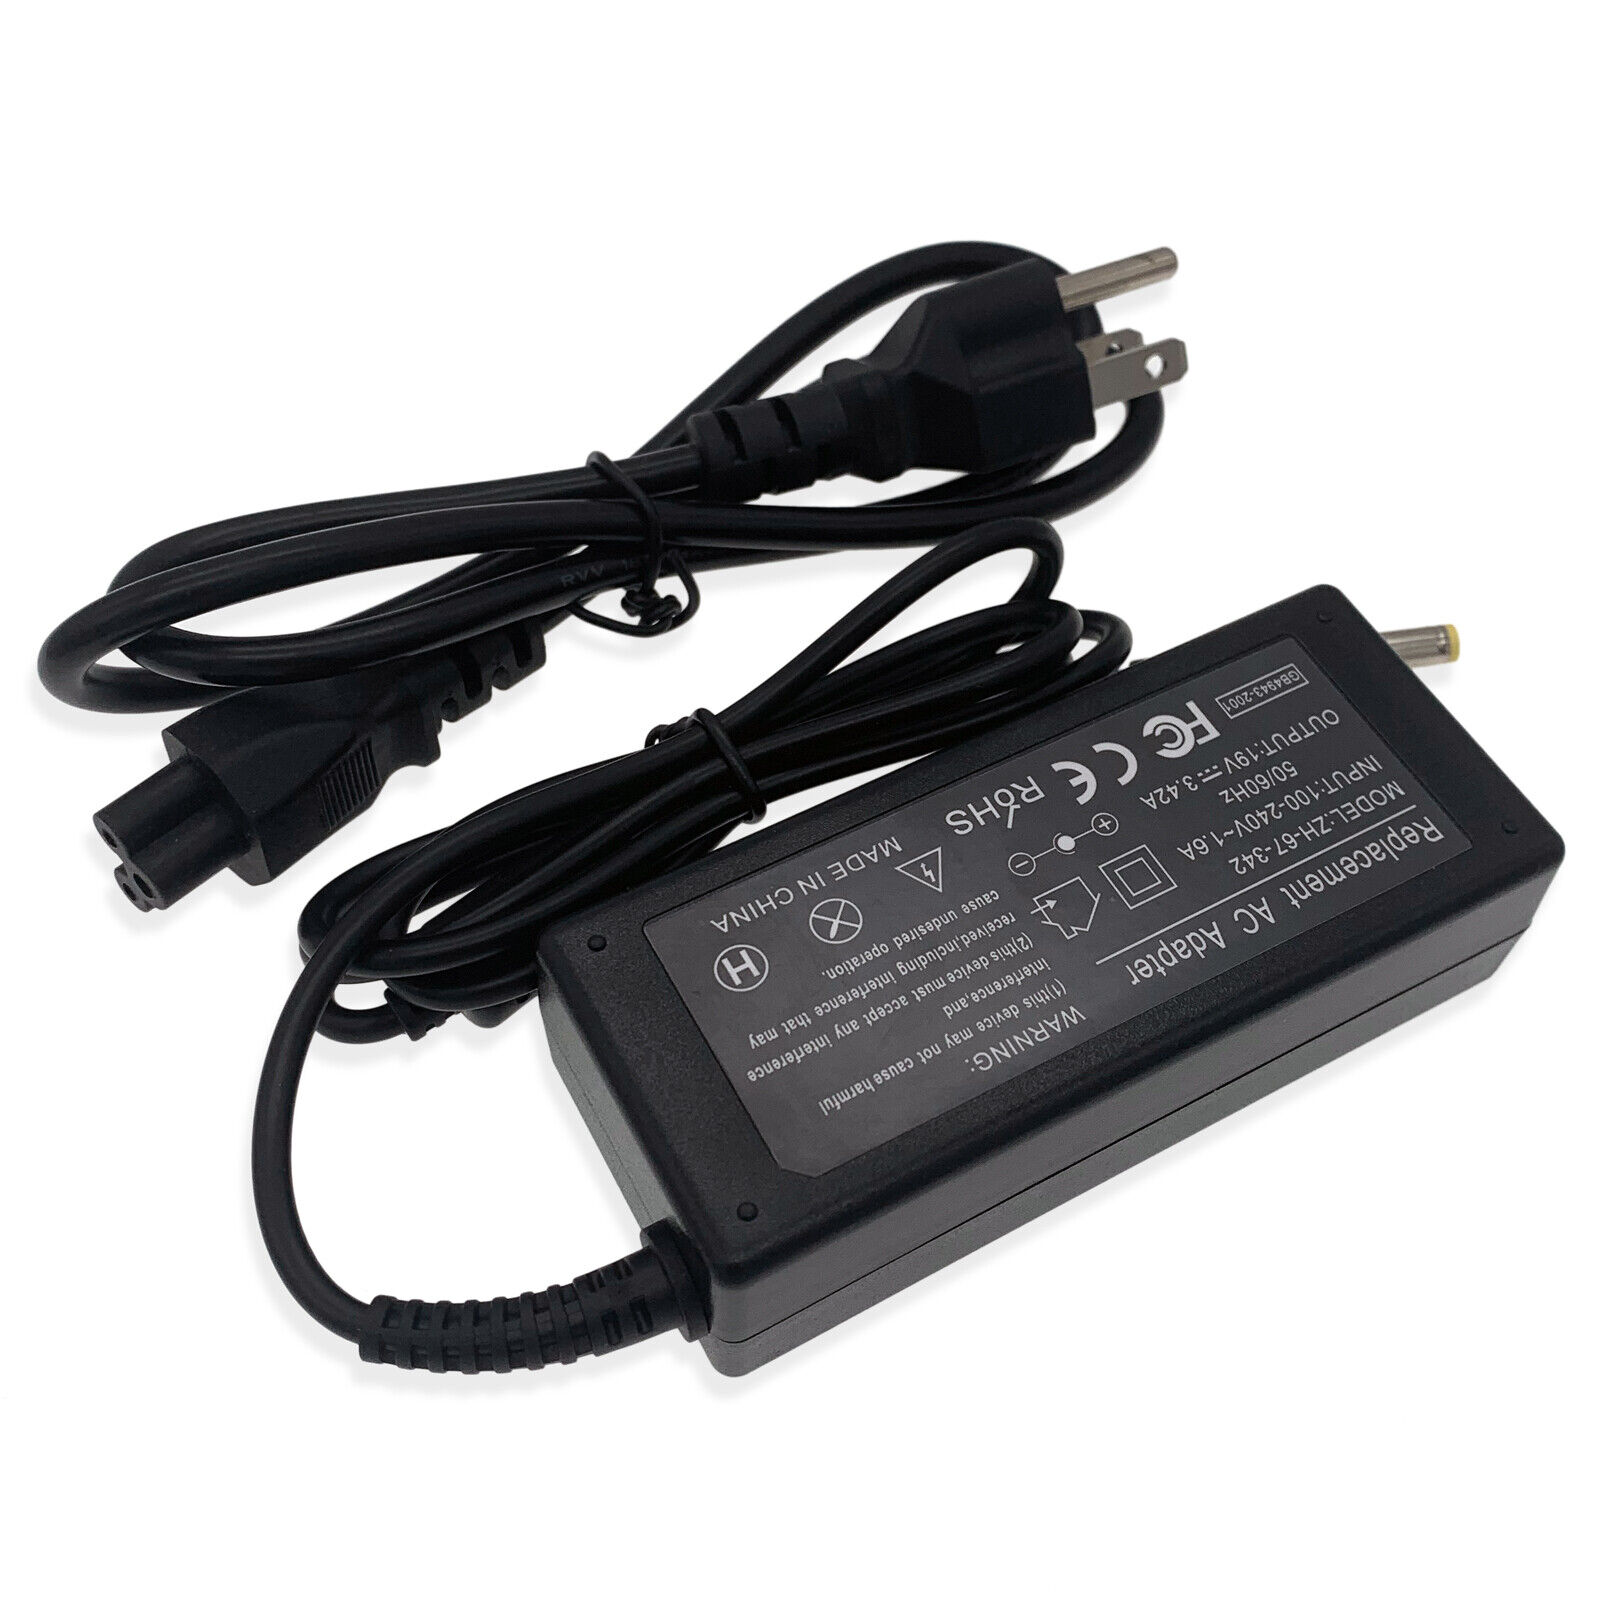 65w AC Adapter Charger Power for Acer Aspire E1-532-4629 E1-532-4646 E1-532-4870 - image 4 of 6